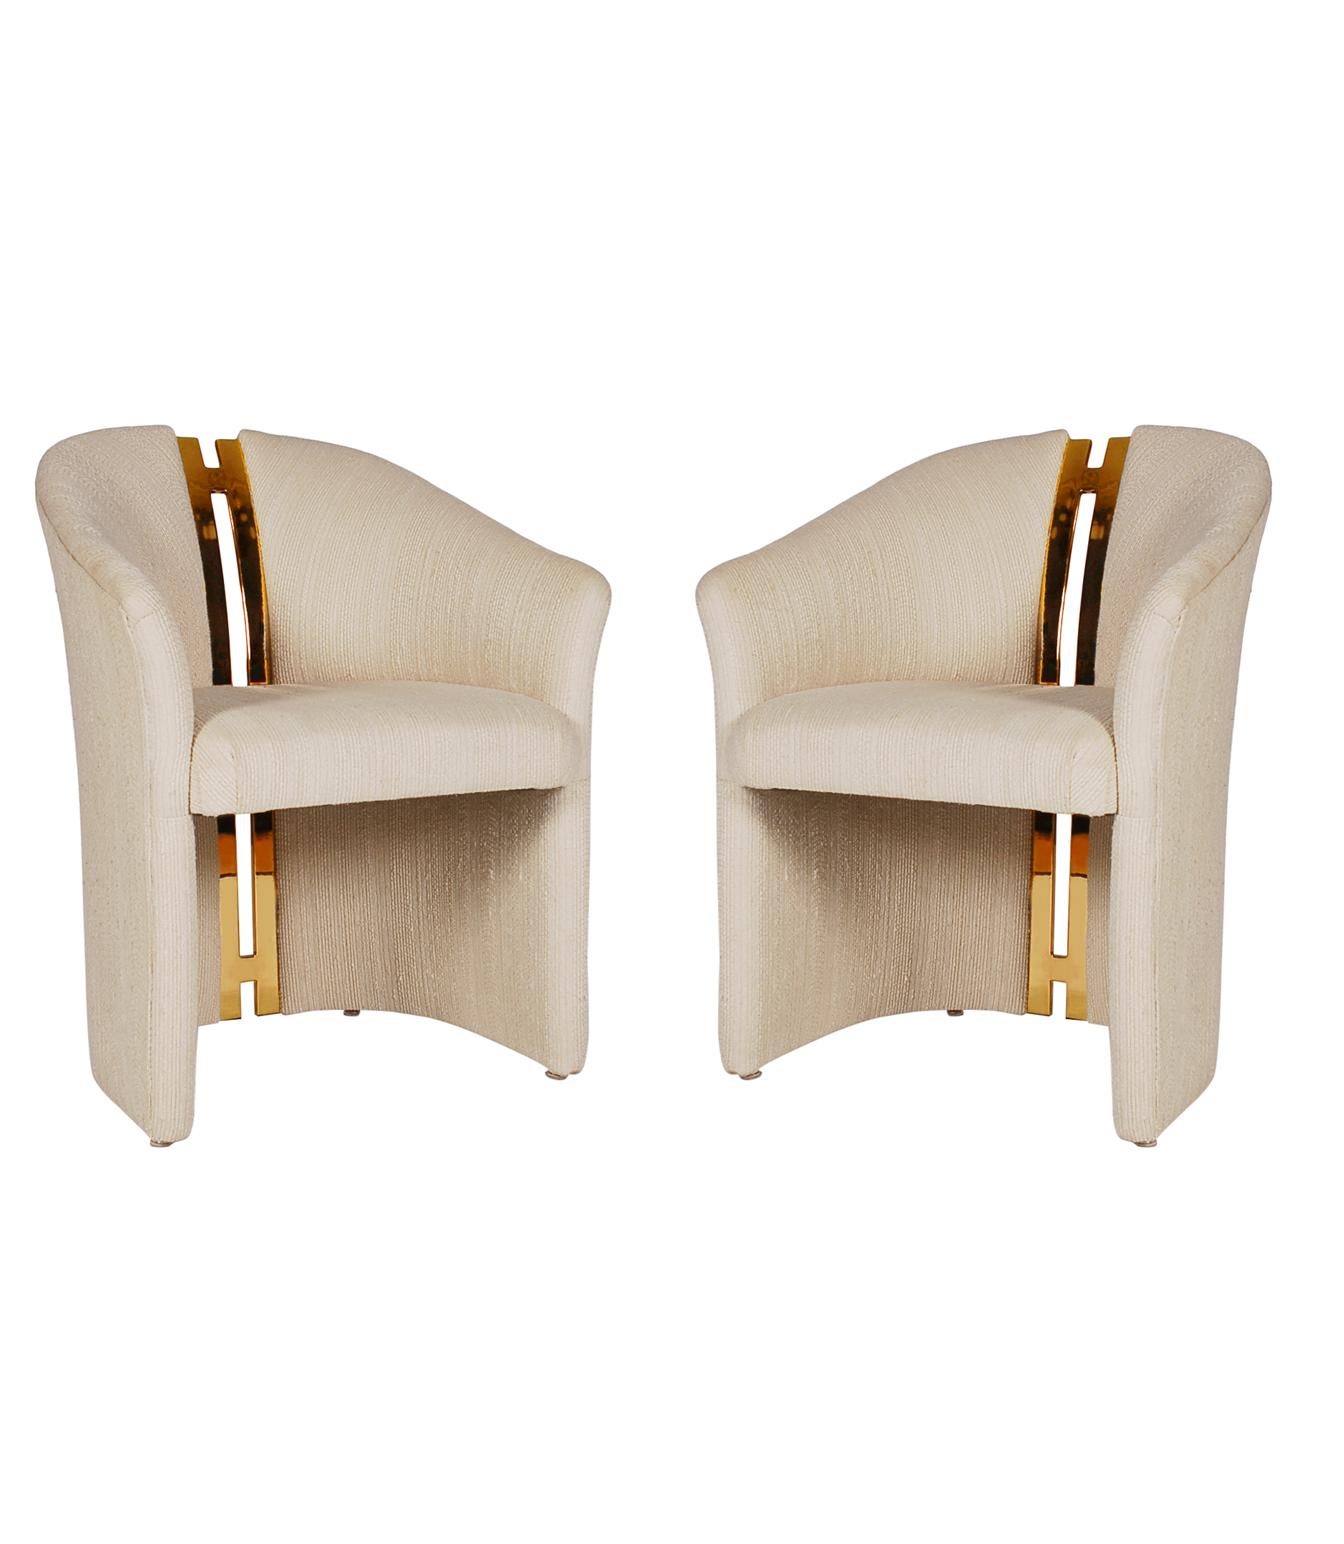 Four Mid-Century Modern Barrel Back Armchairs with Brass after Pierre Cardin 1